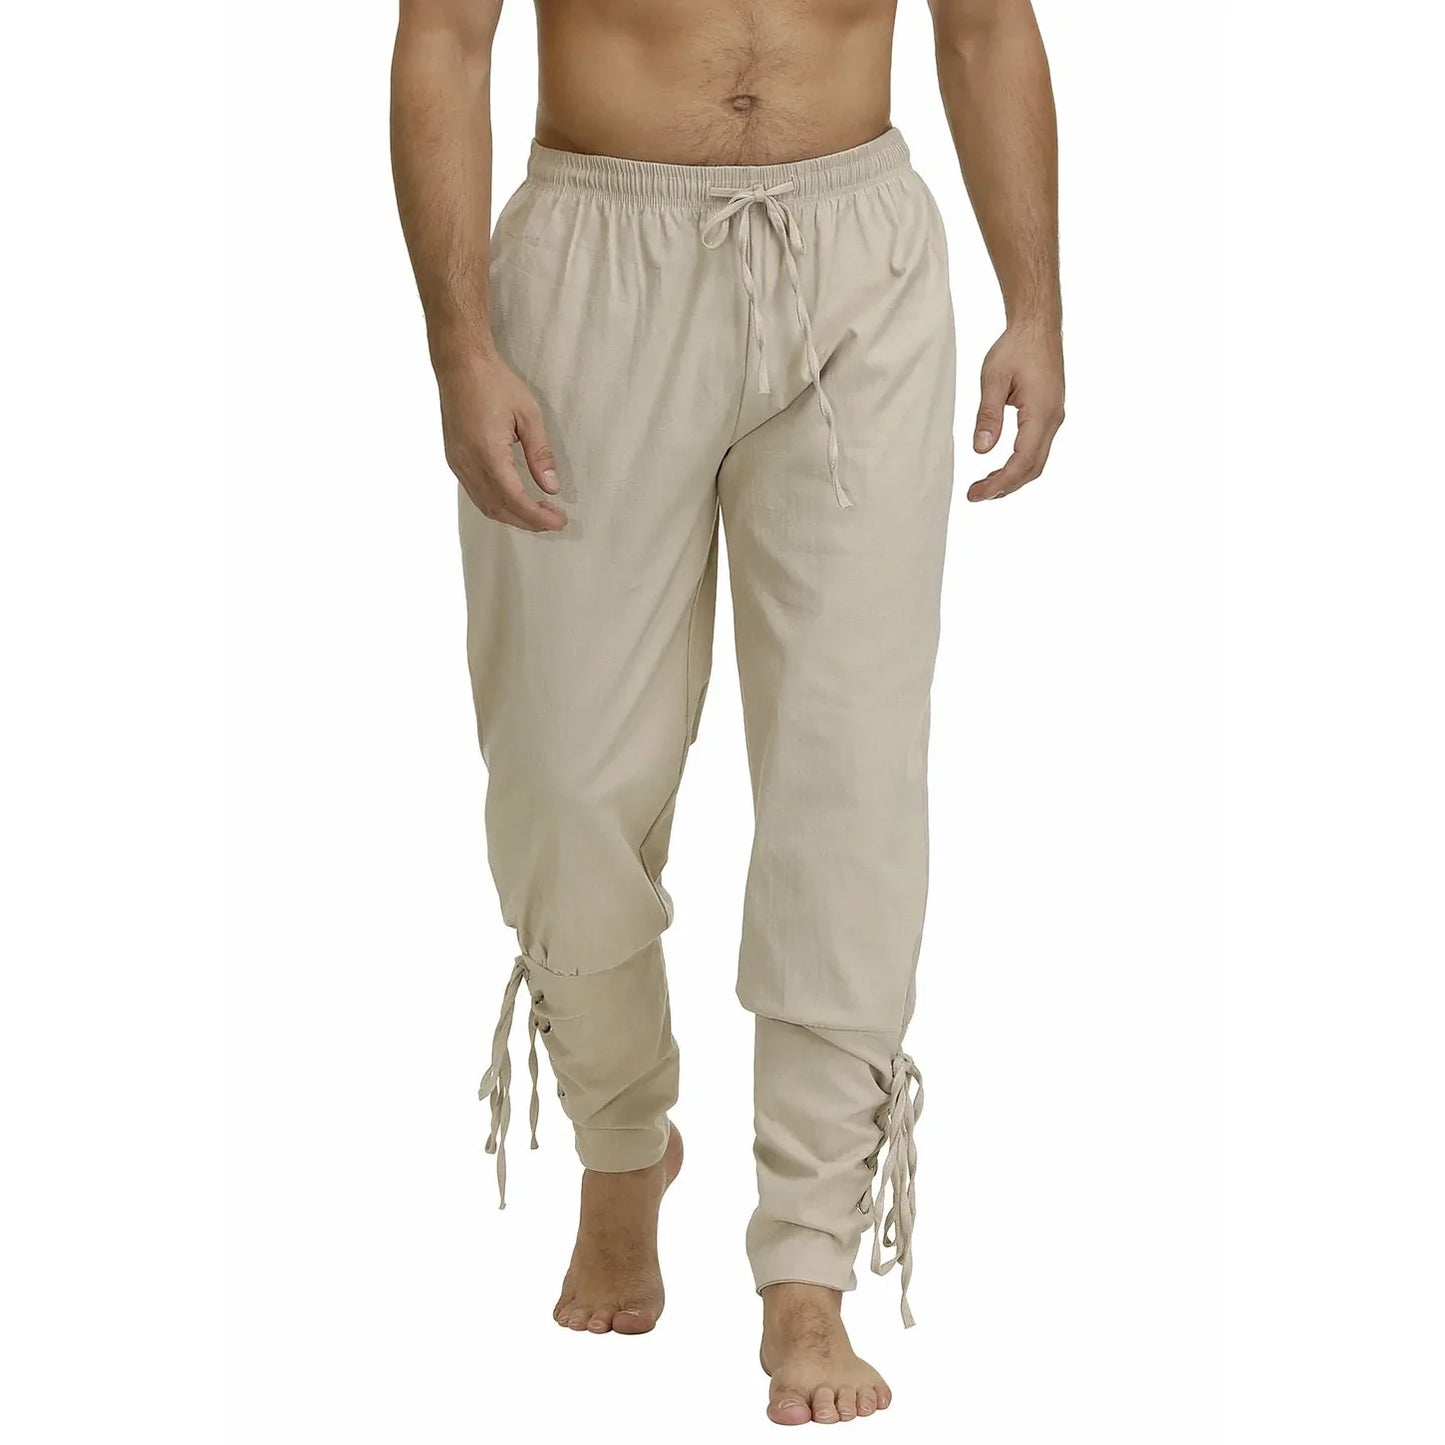 High Waist Lace Up Viking Trousers